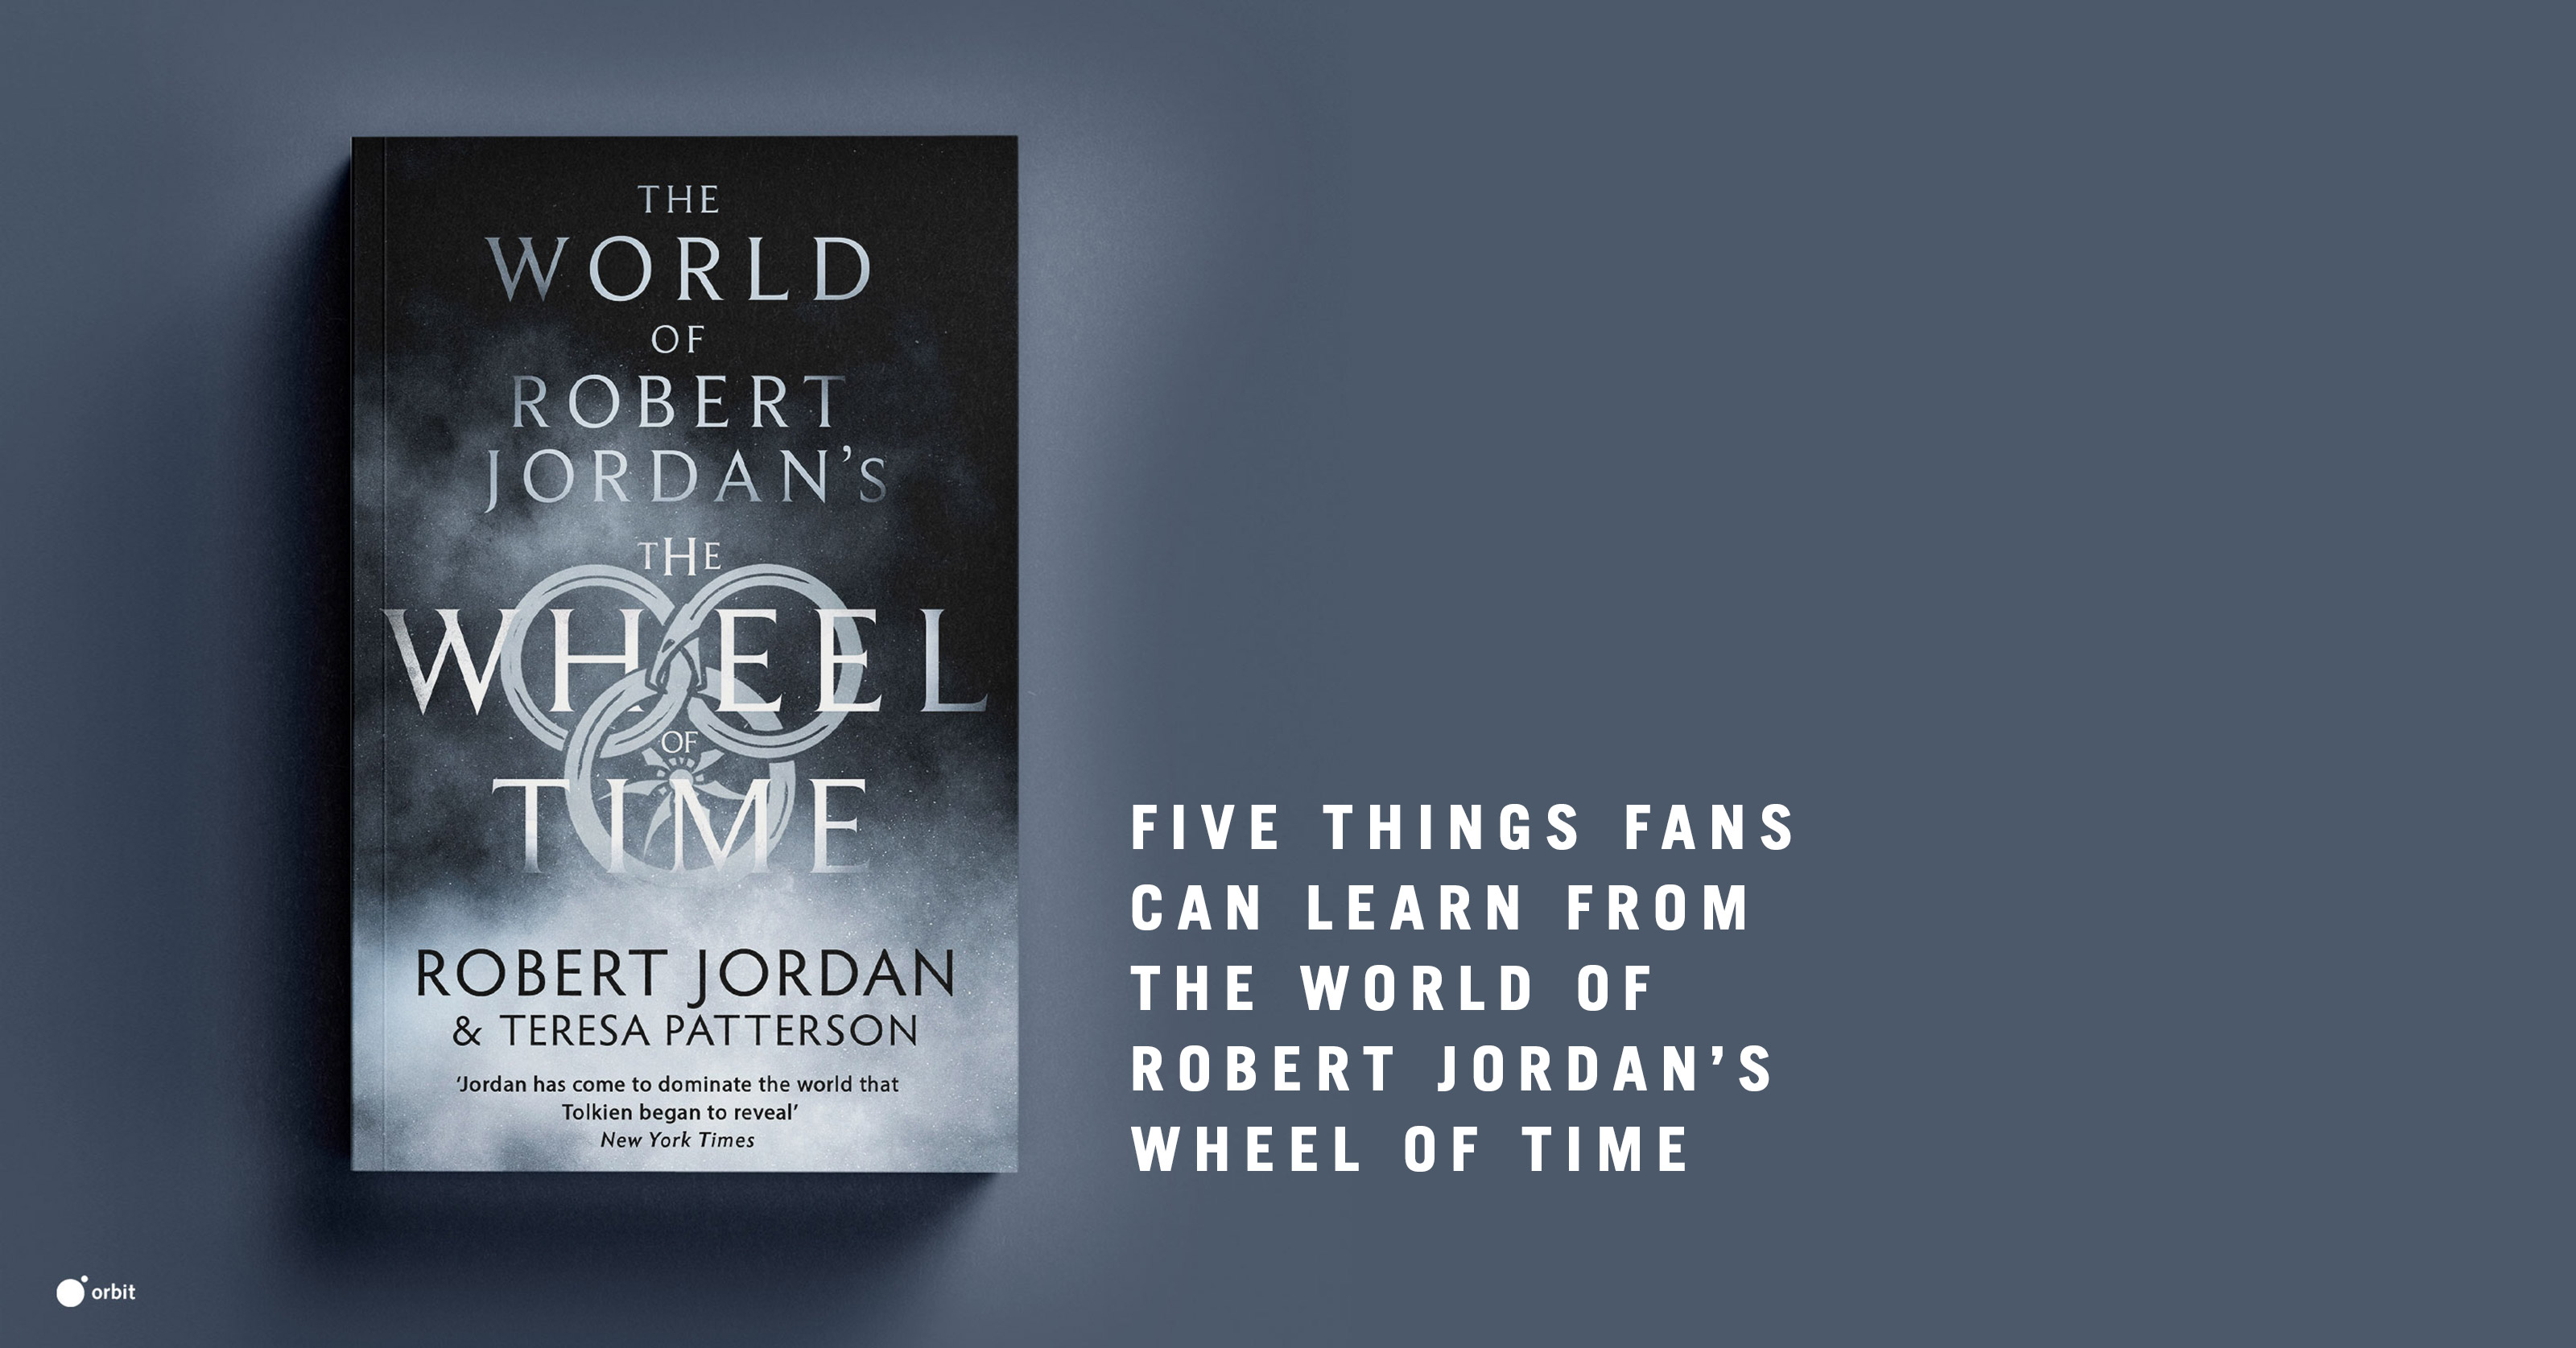 Five Things Fans Can Learn From The World of Robert Jordan’s Wheel of Time